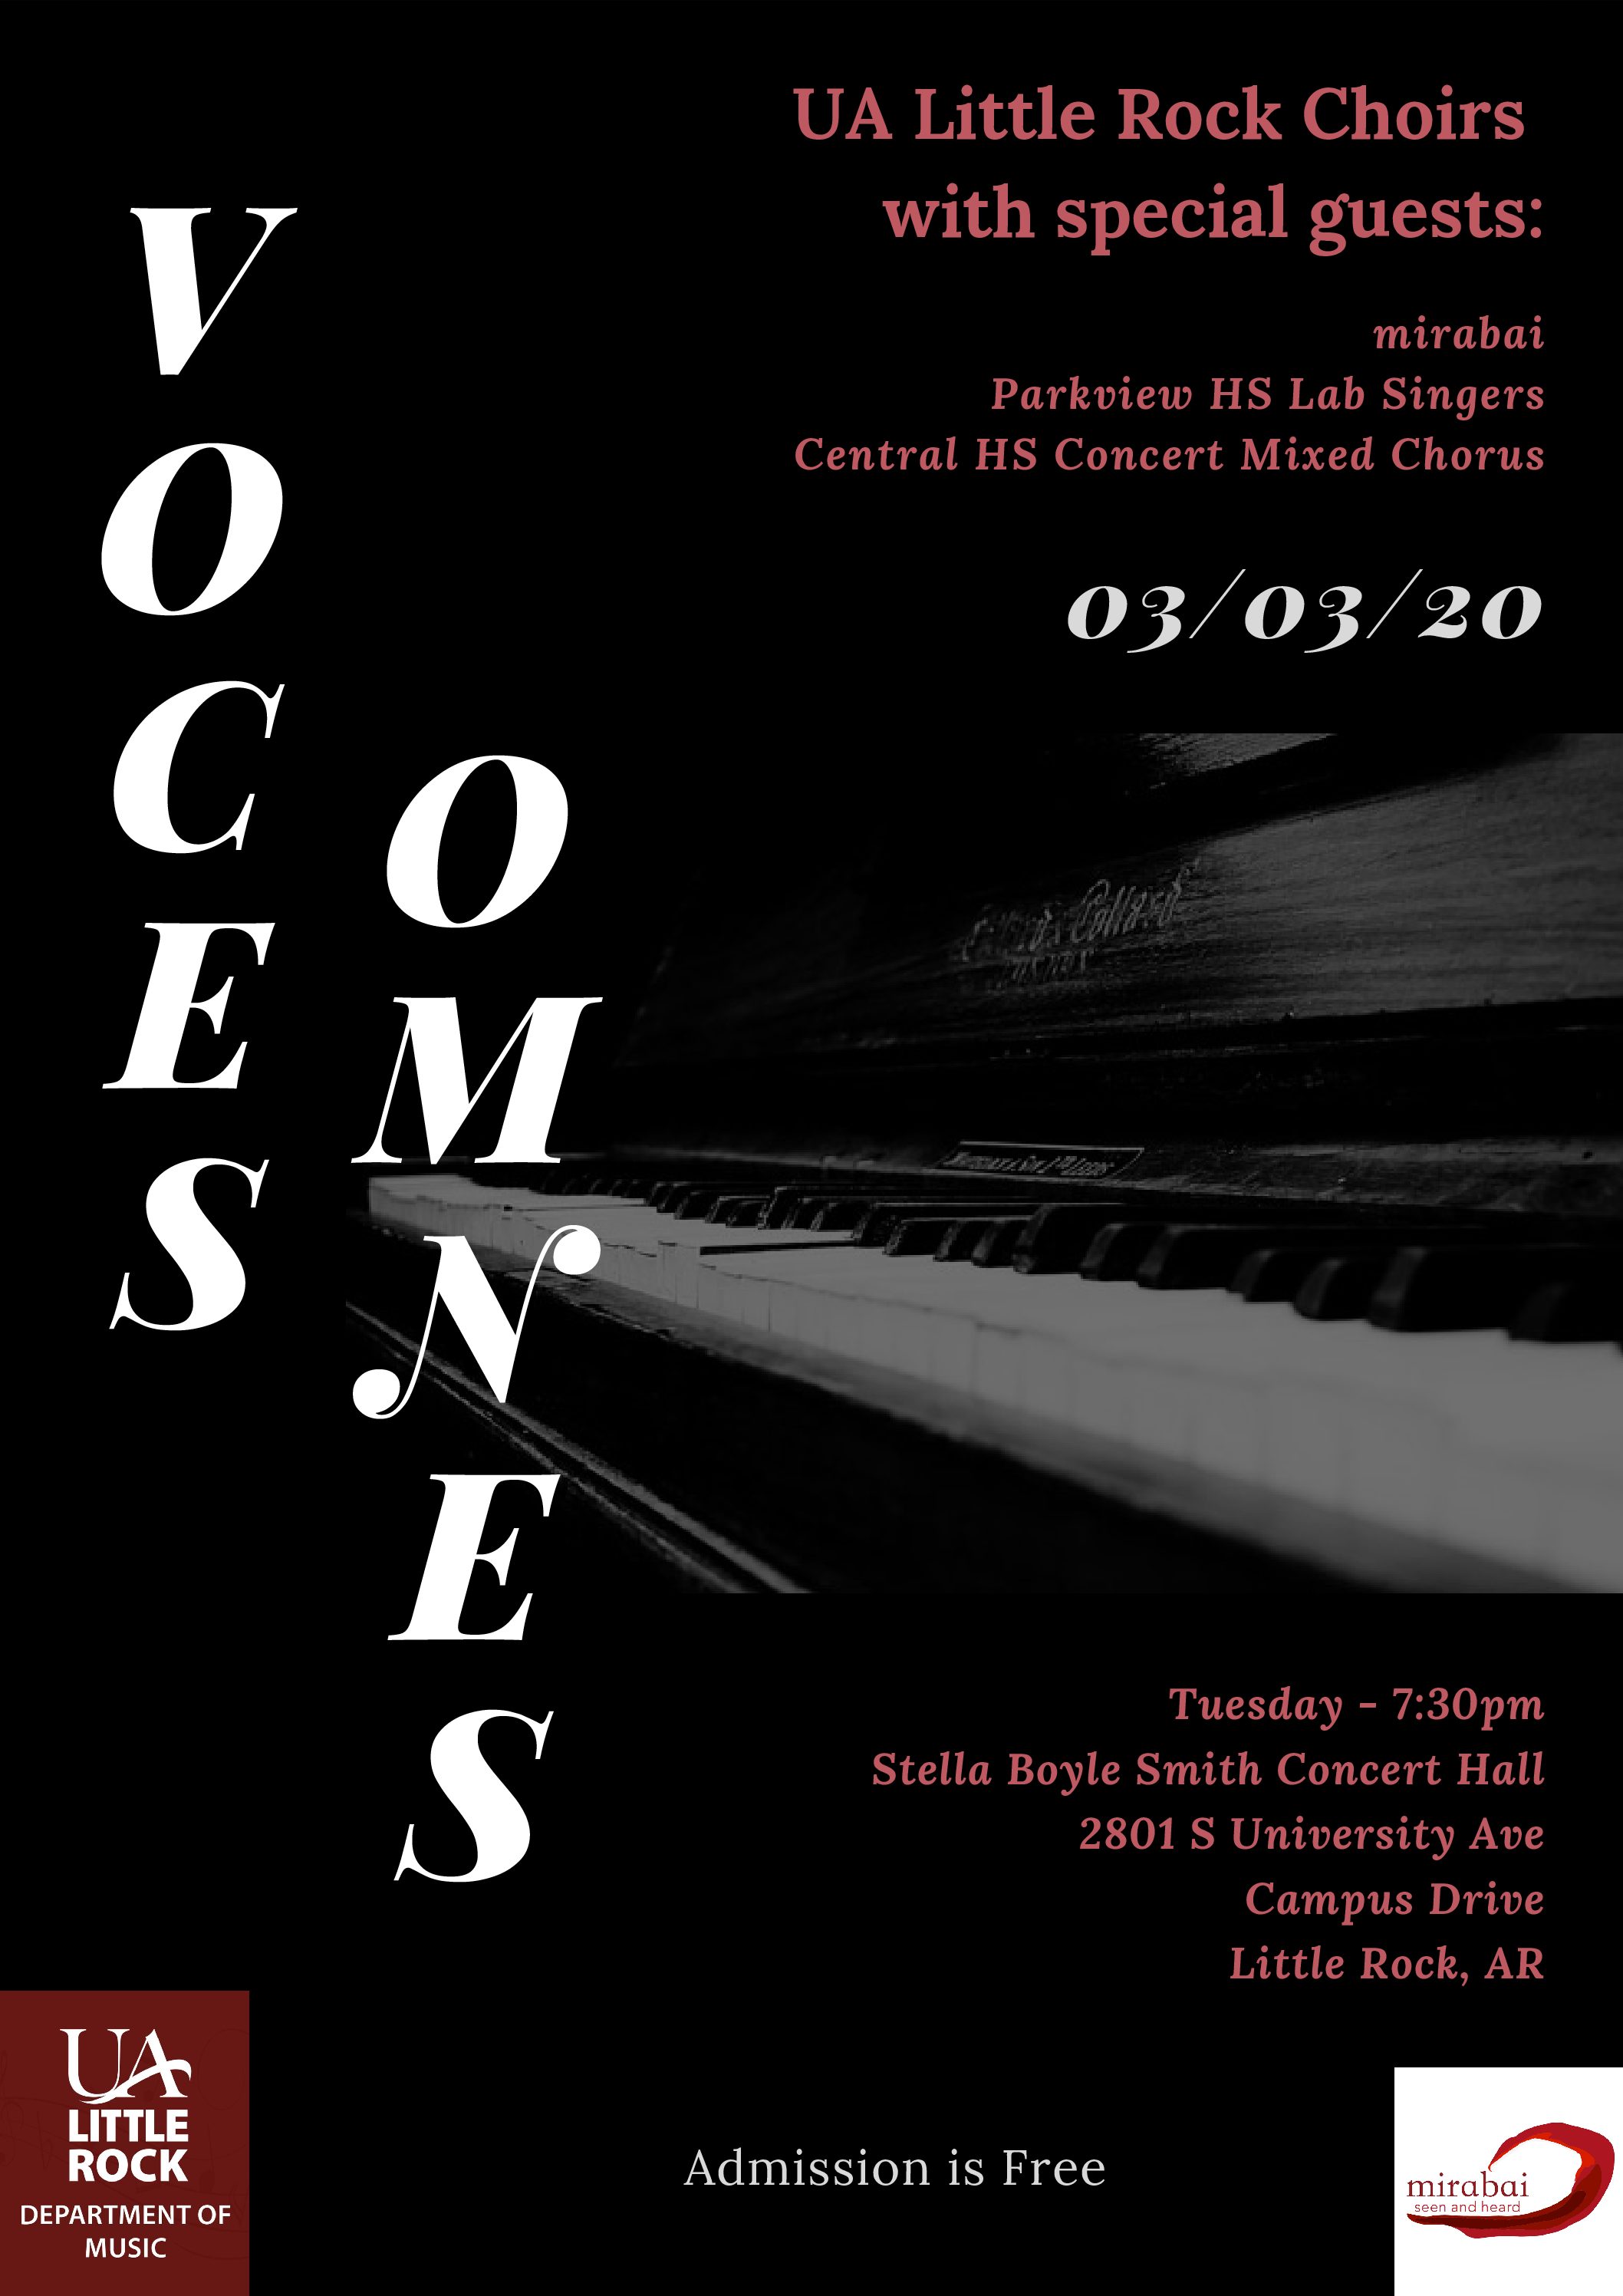 The Voces Omnes Concert will take place on March 3.